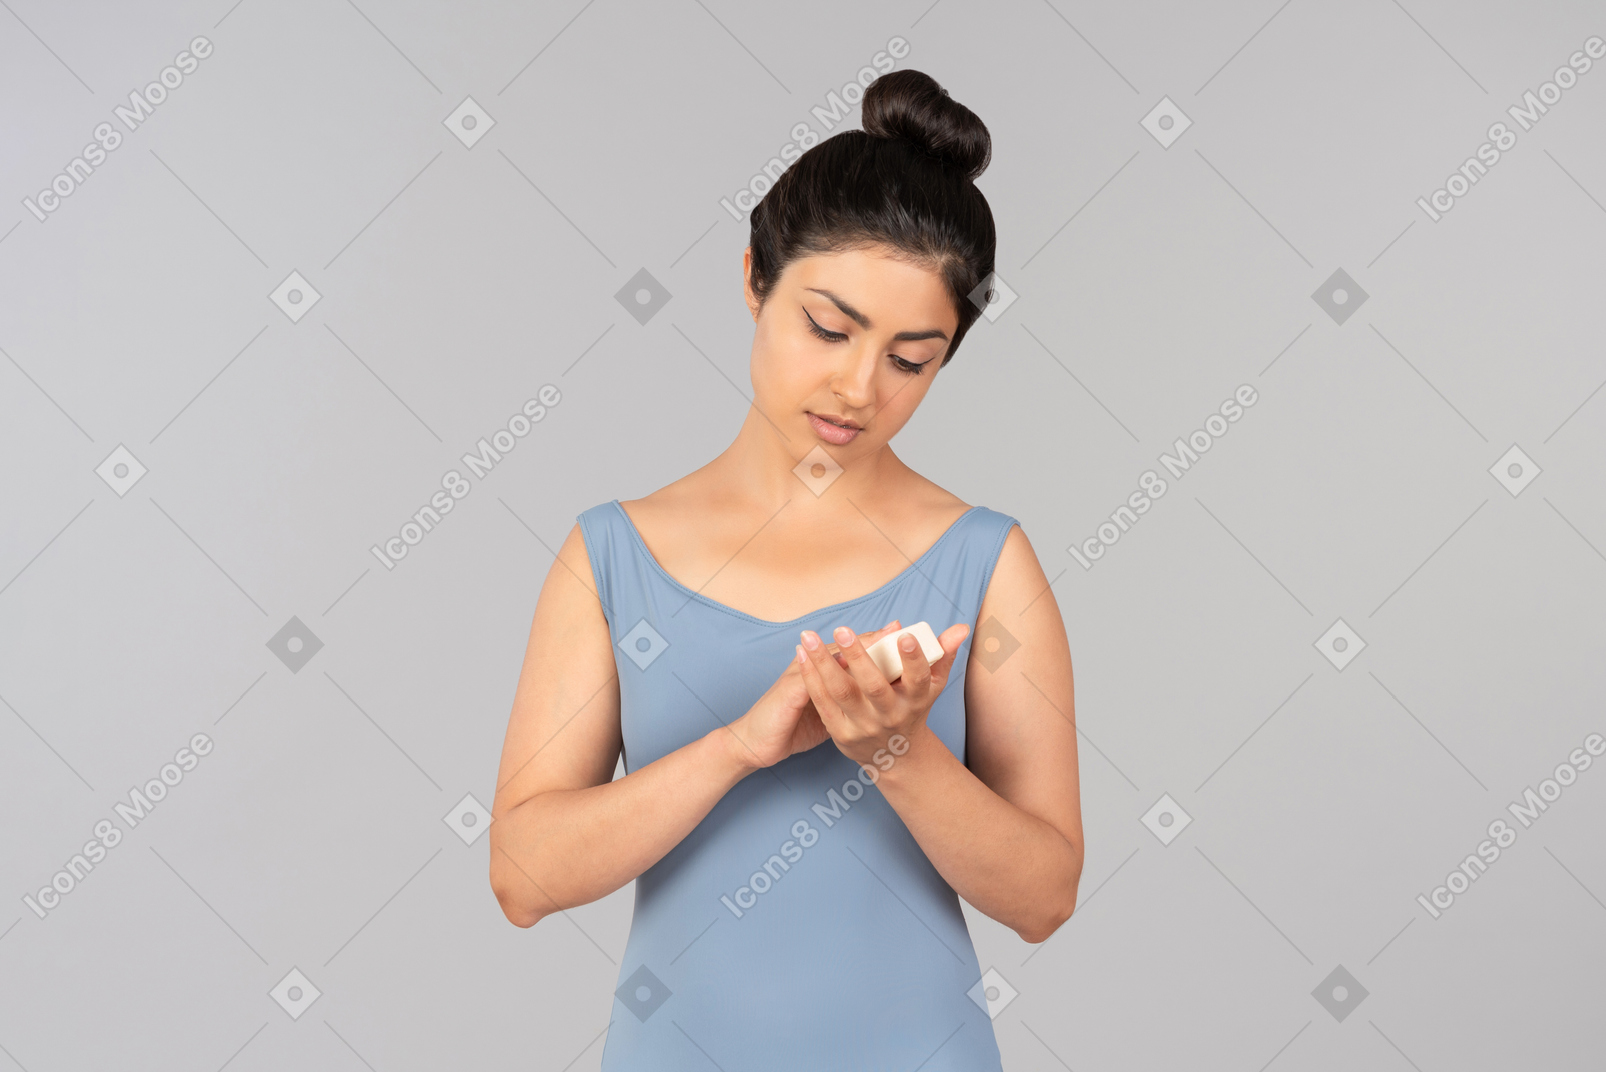 Young indian woman looking at cream bottle she's holding